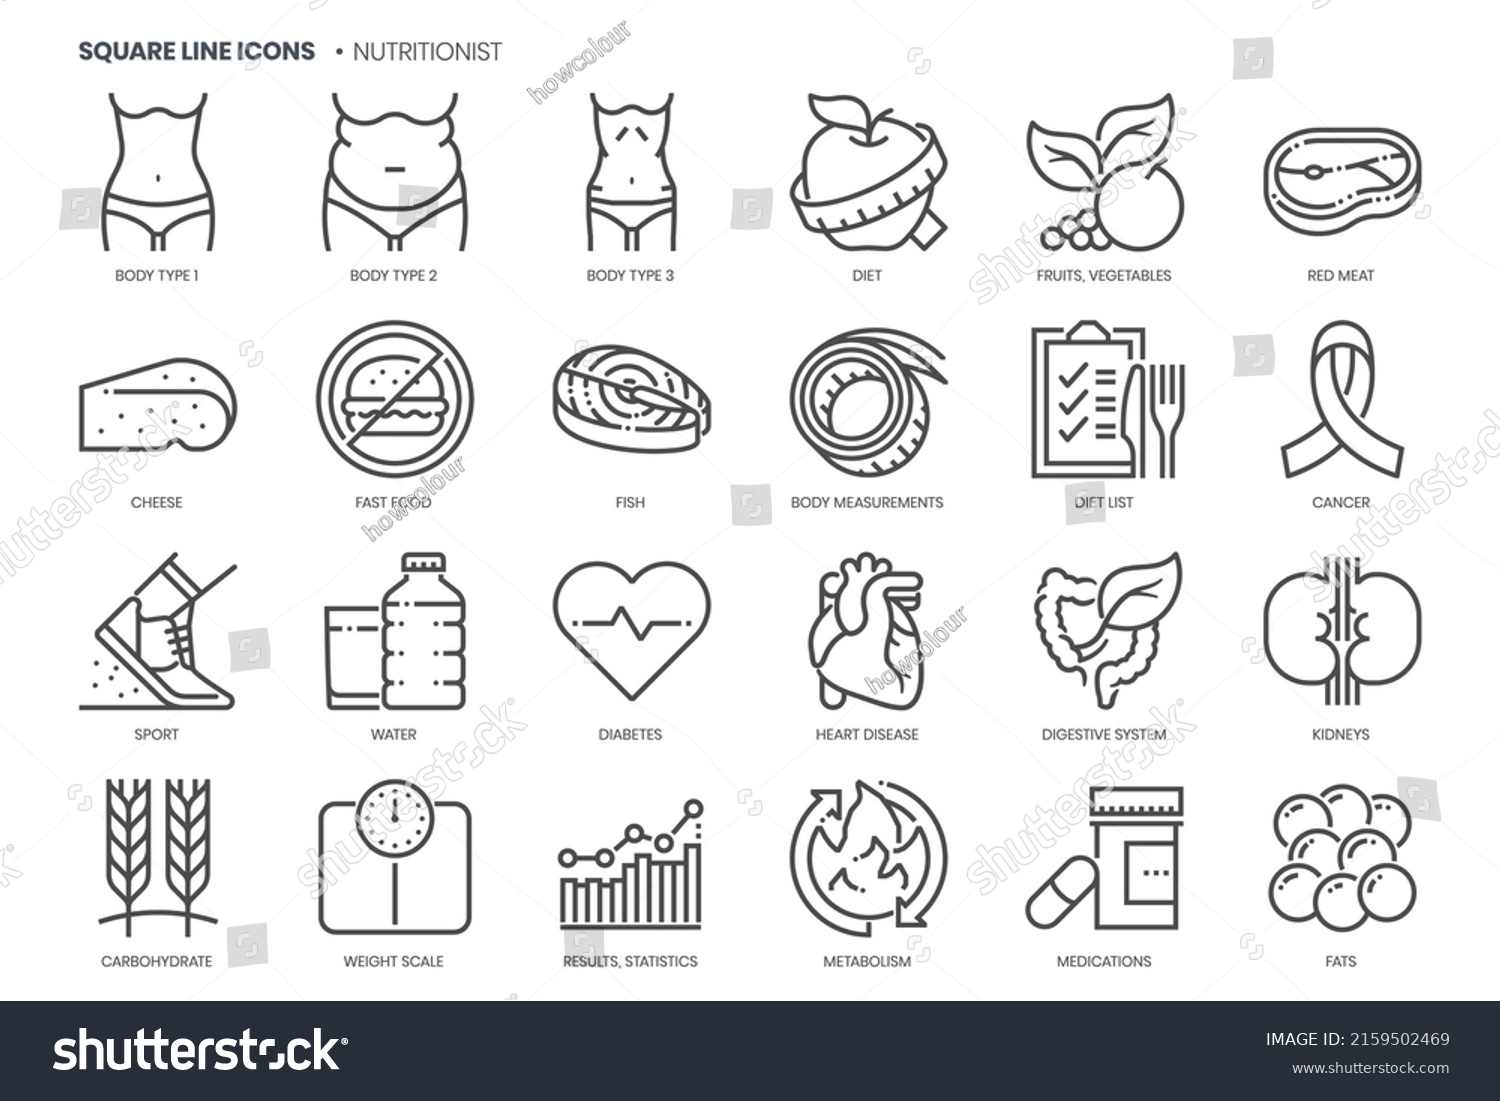 SVG of Nutritionist related, pixel perfect, editable stroke, up scalable square line vector icon set.  svg